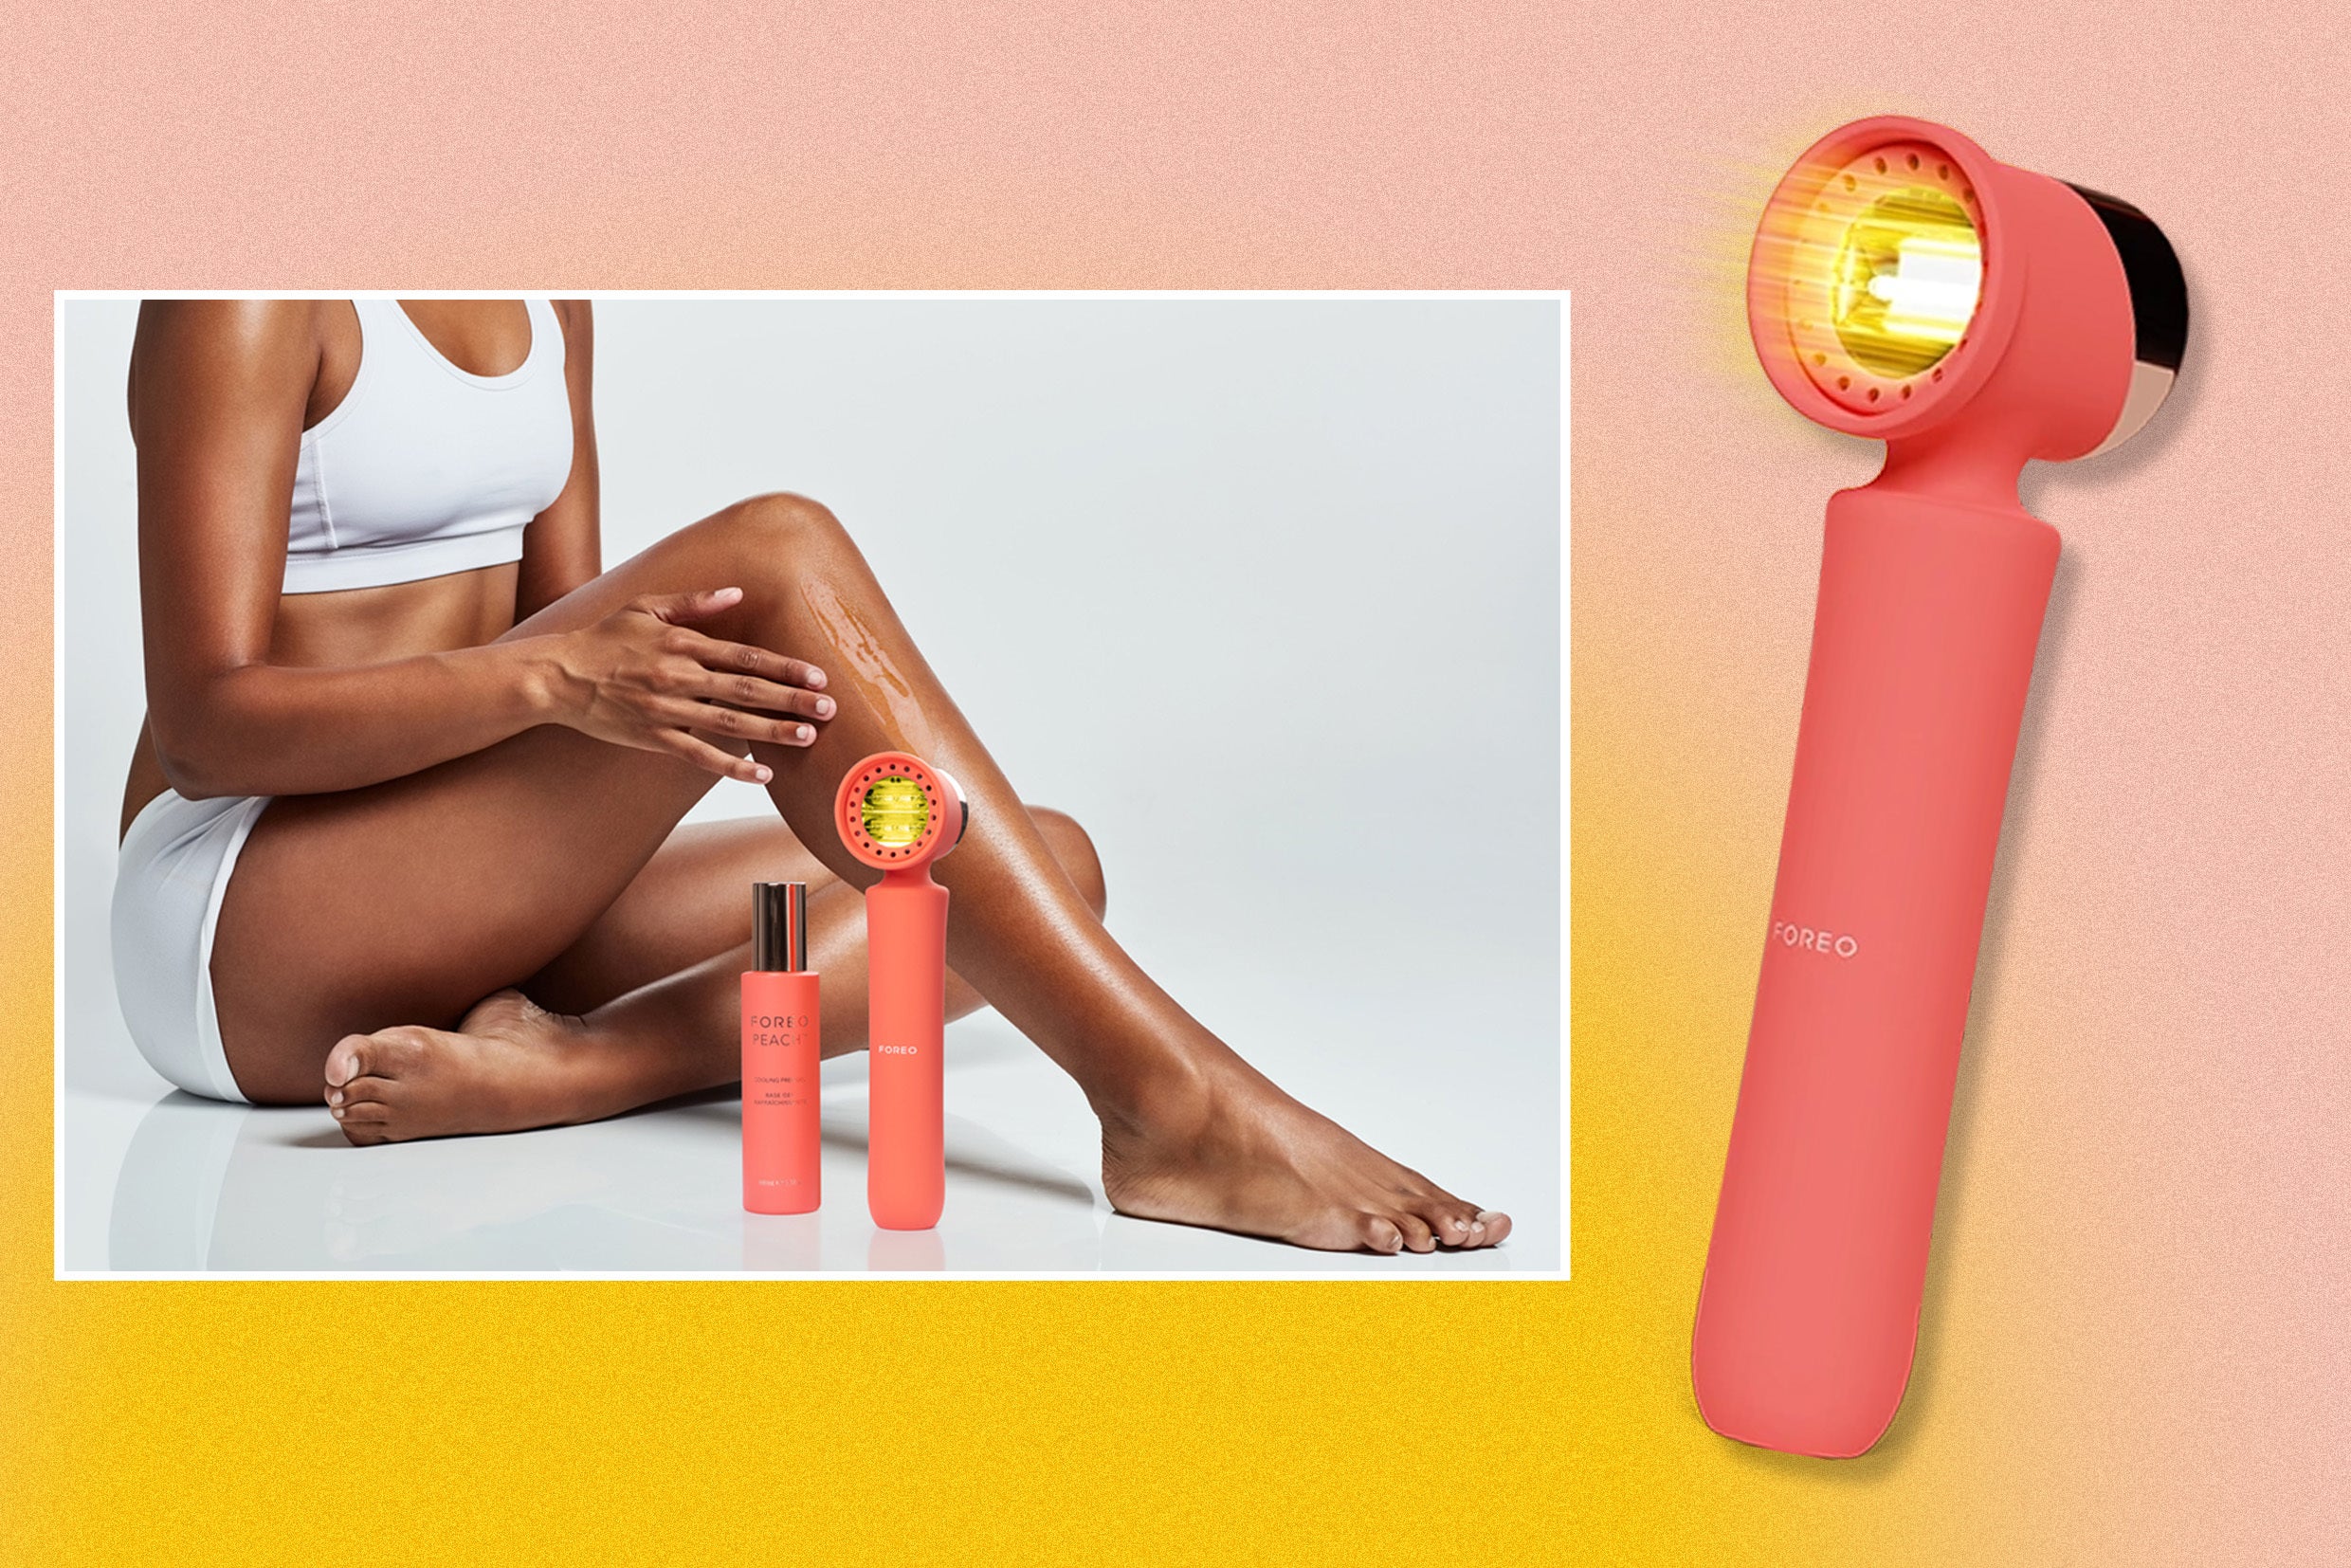 This looks like a chic piece of tech, particularly in the world of hair removal